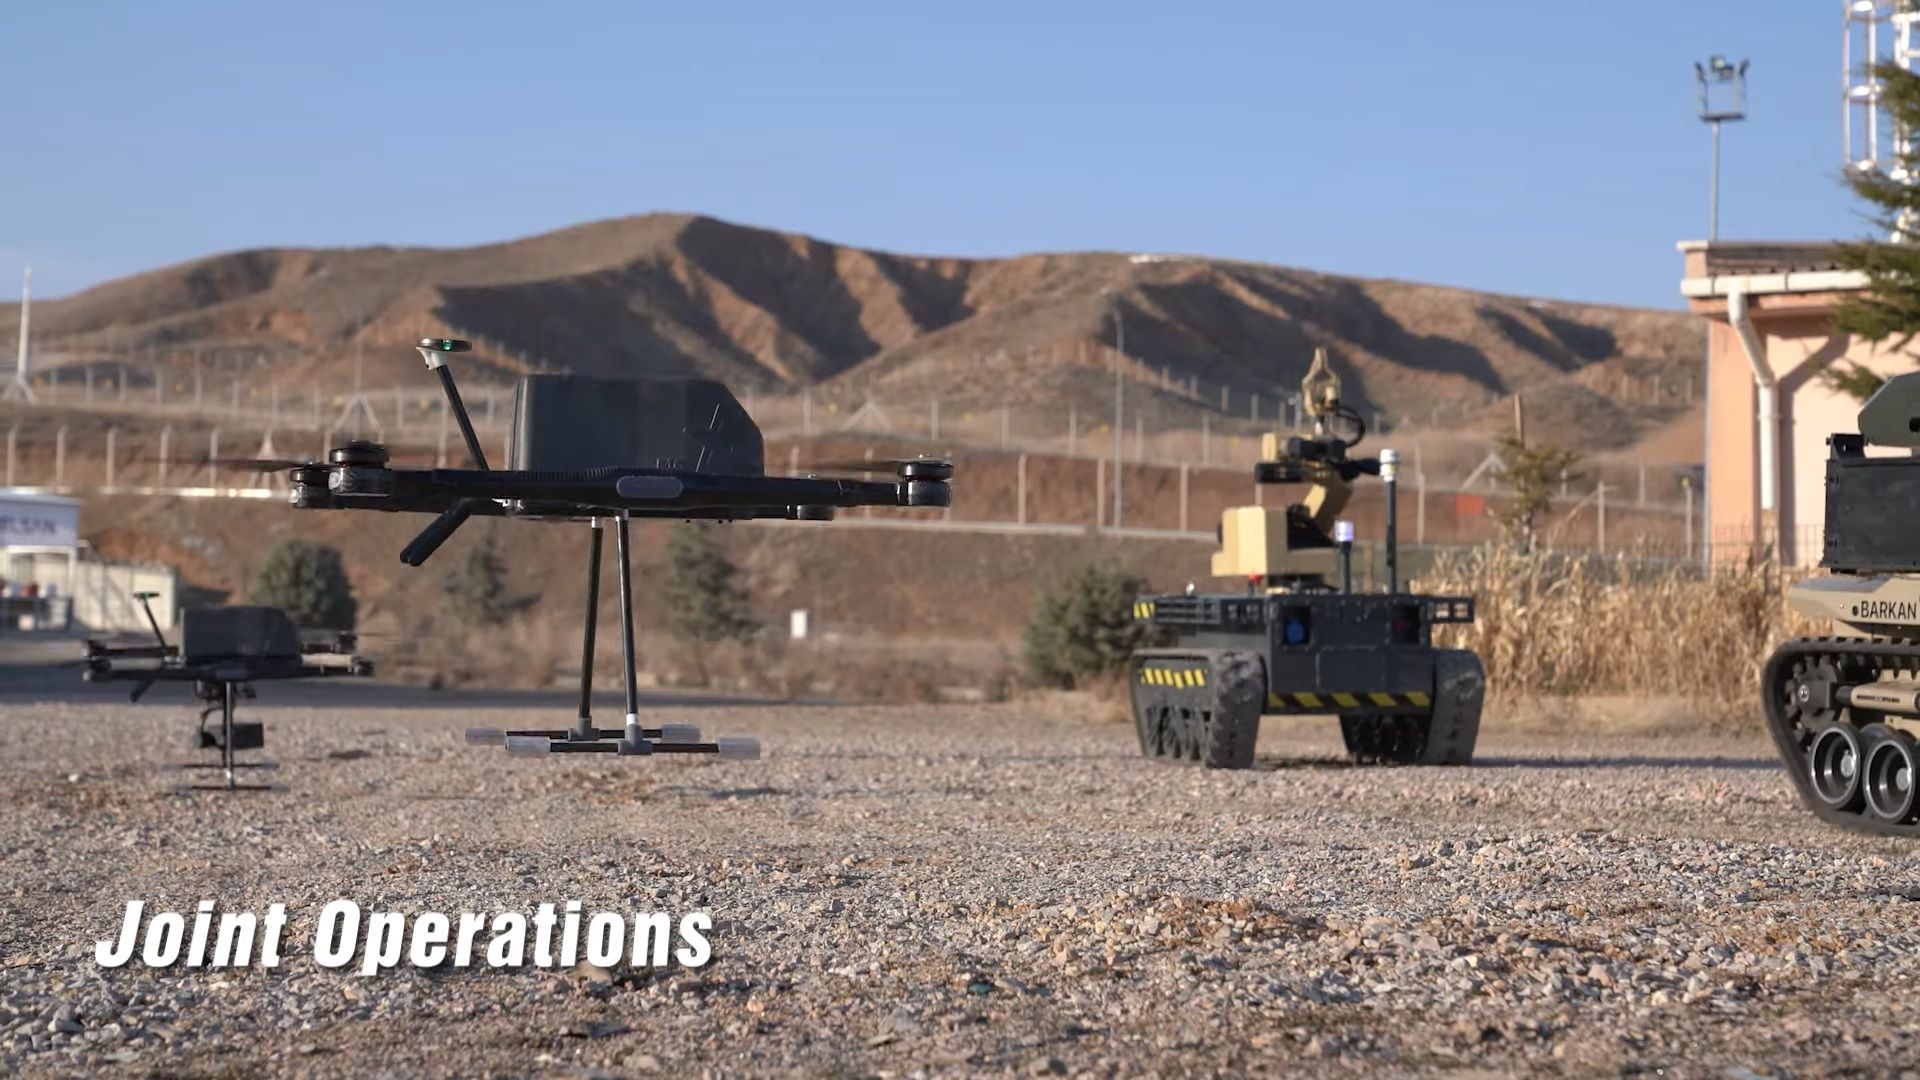 HAVELSAN combined Unmanned Systems in Swarm Technology